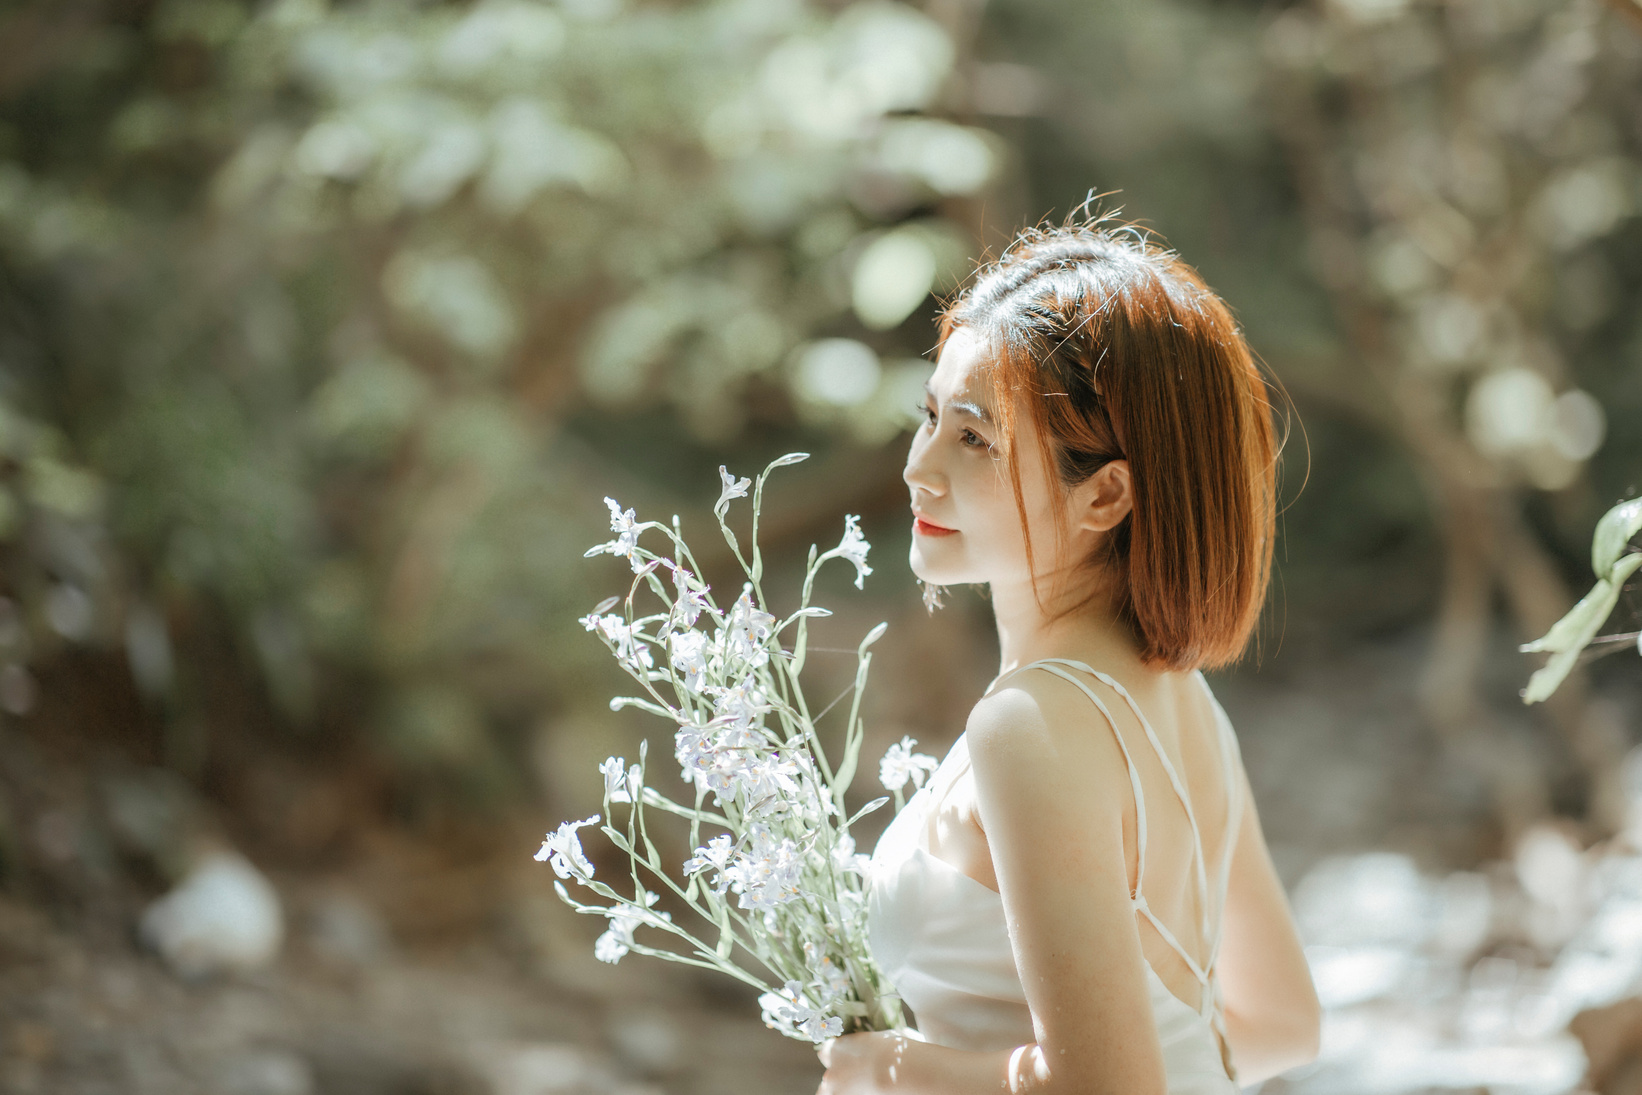 Delicate Woman Holding Flowers Outdoors 